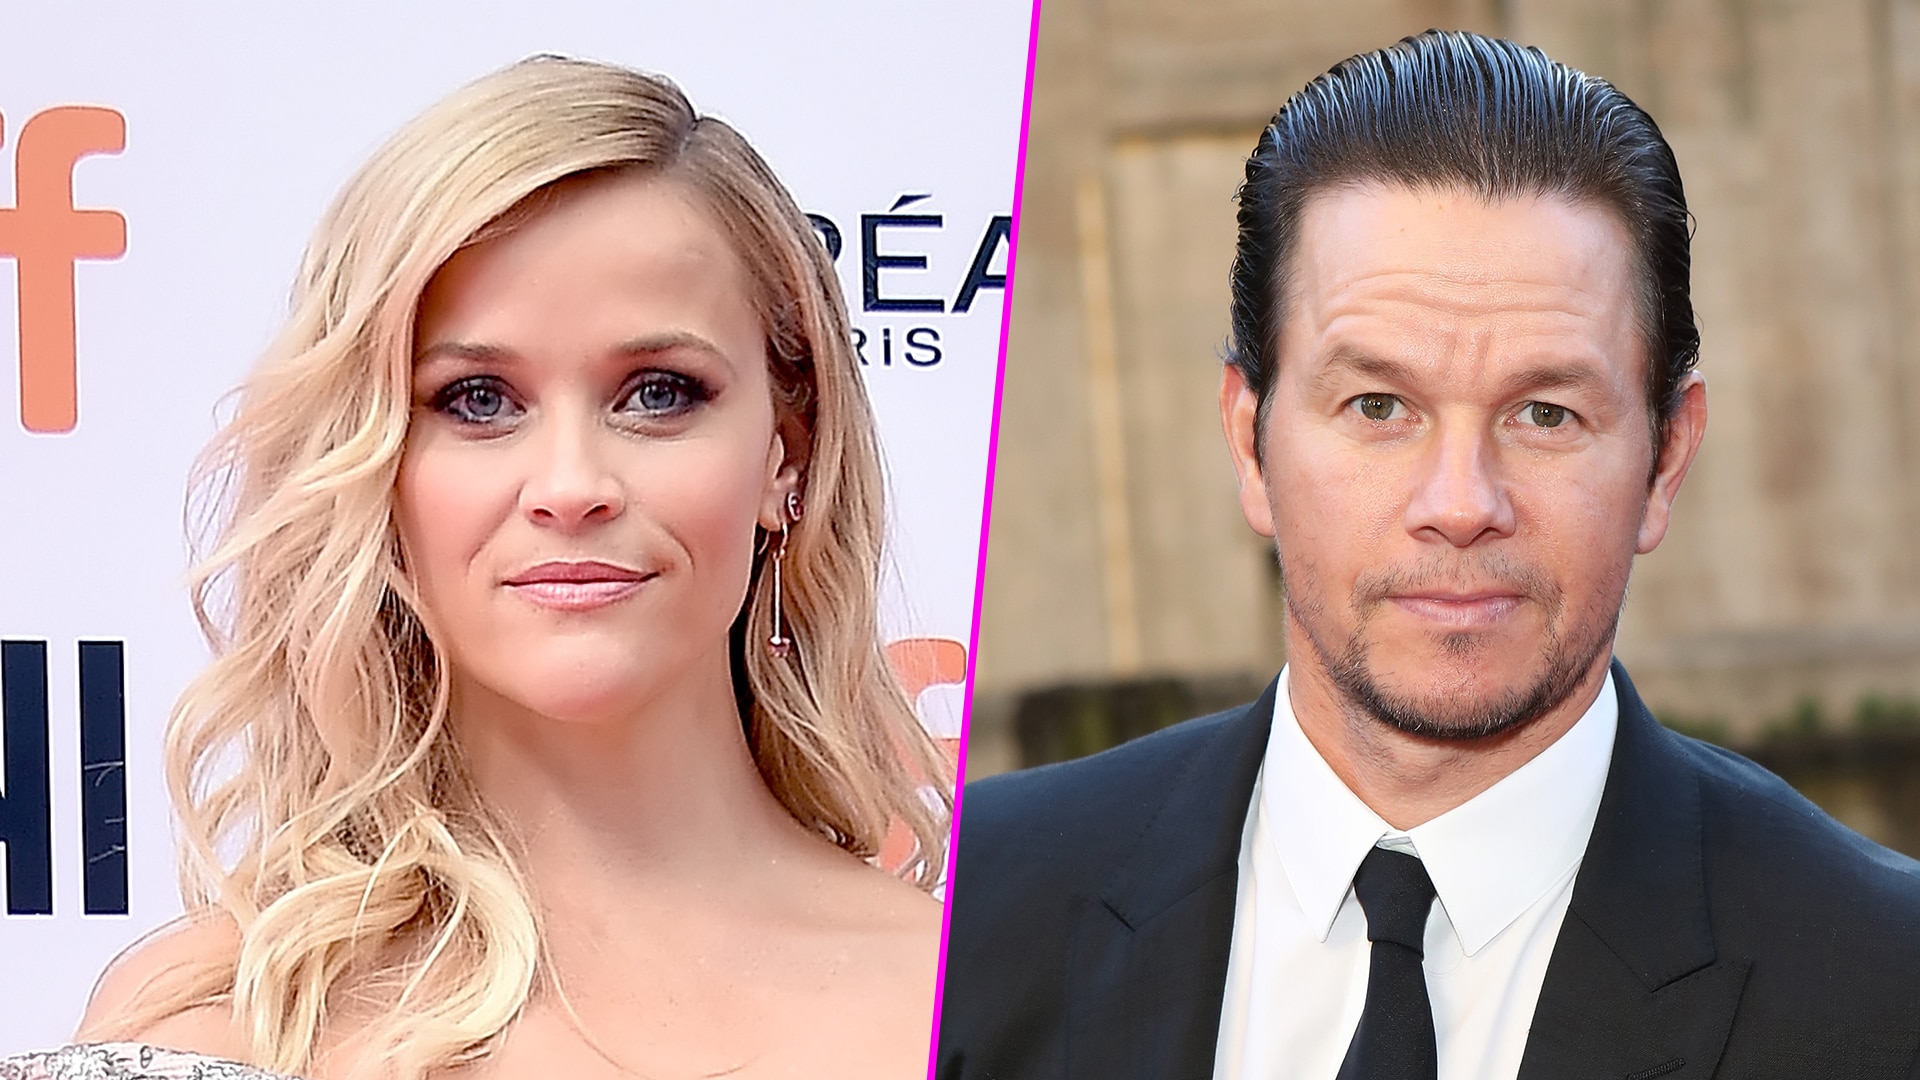 Watch Access Hollywood Interview Reese Witherspoon Mark Wahlberg And